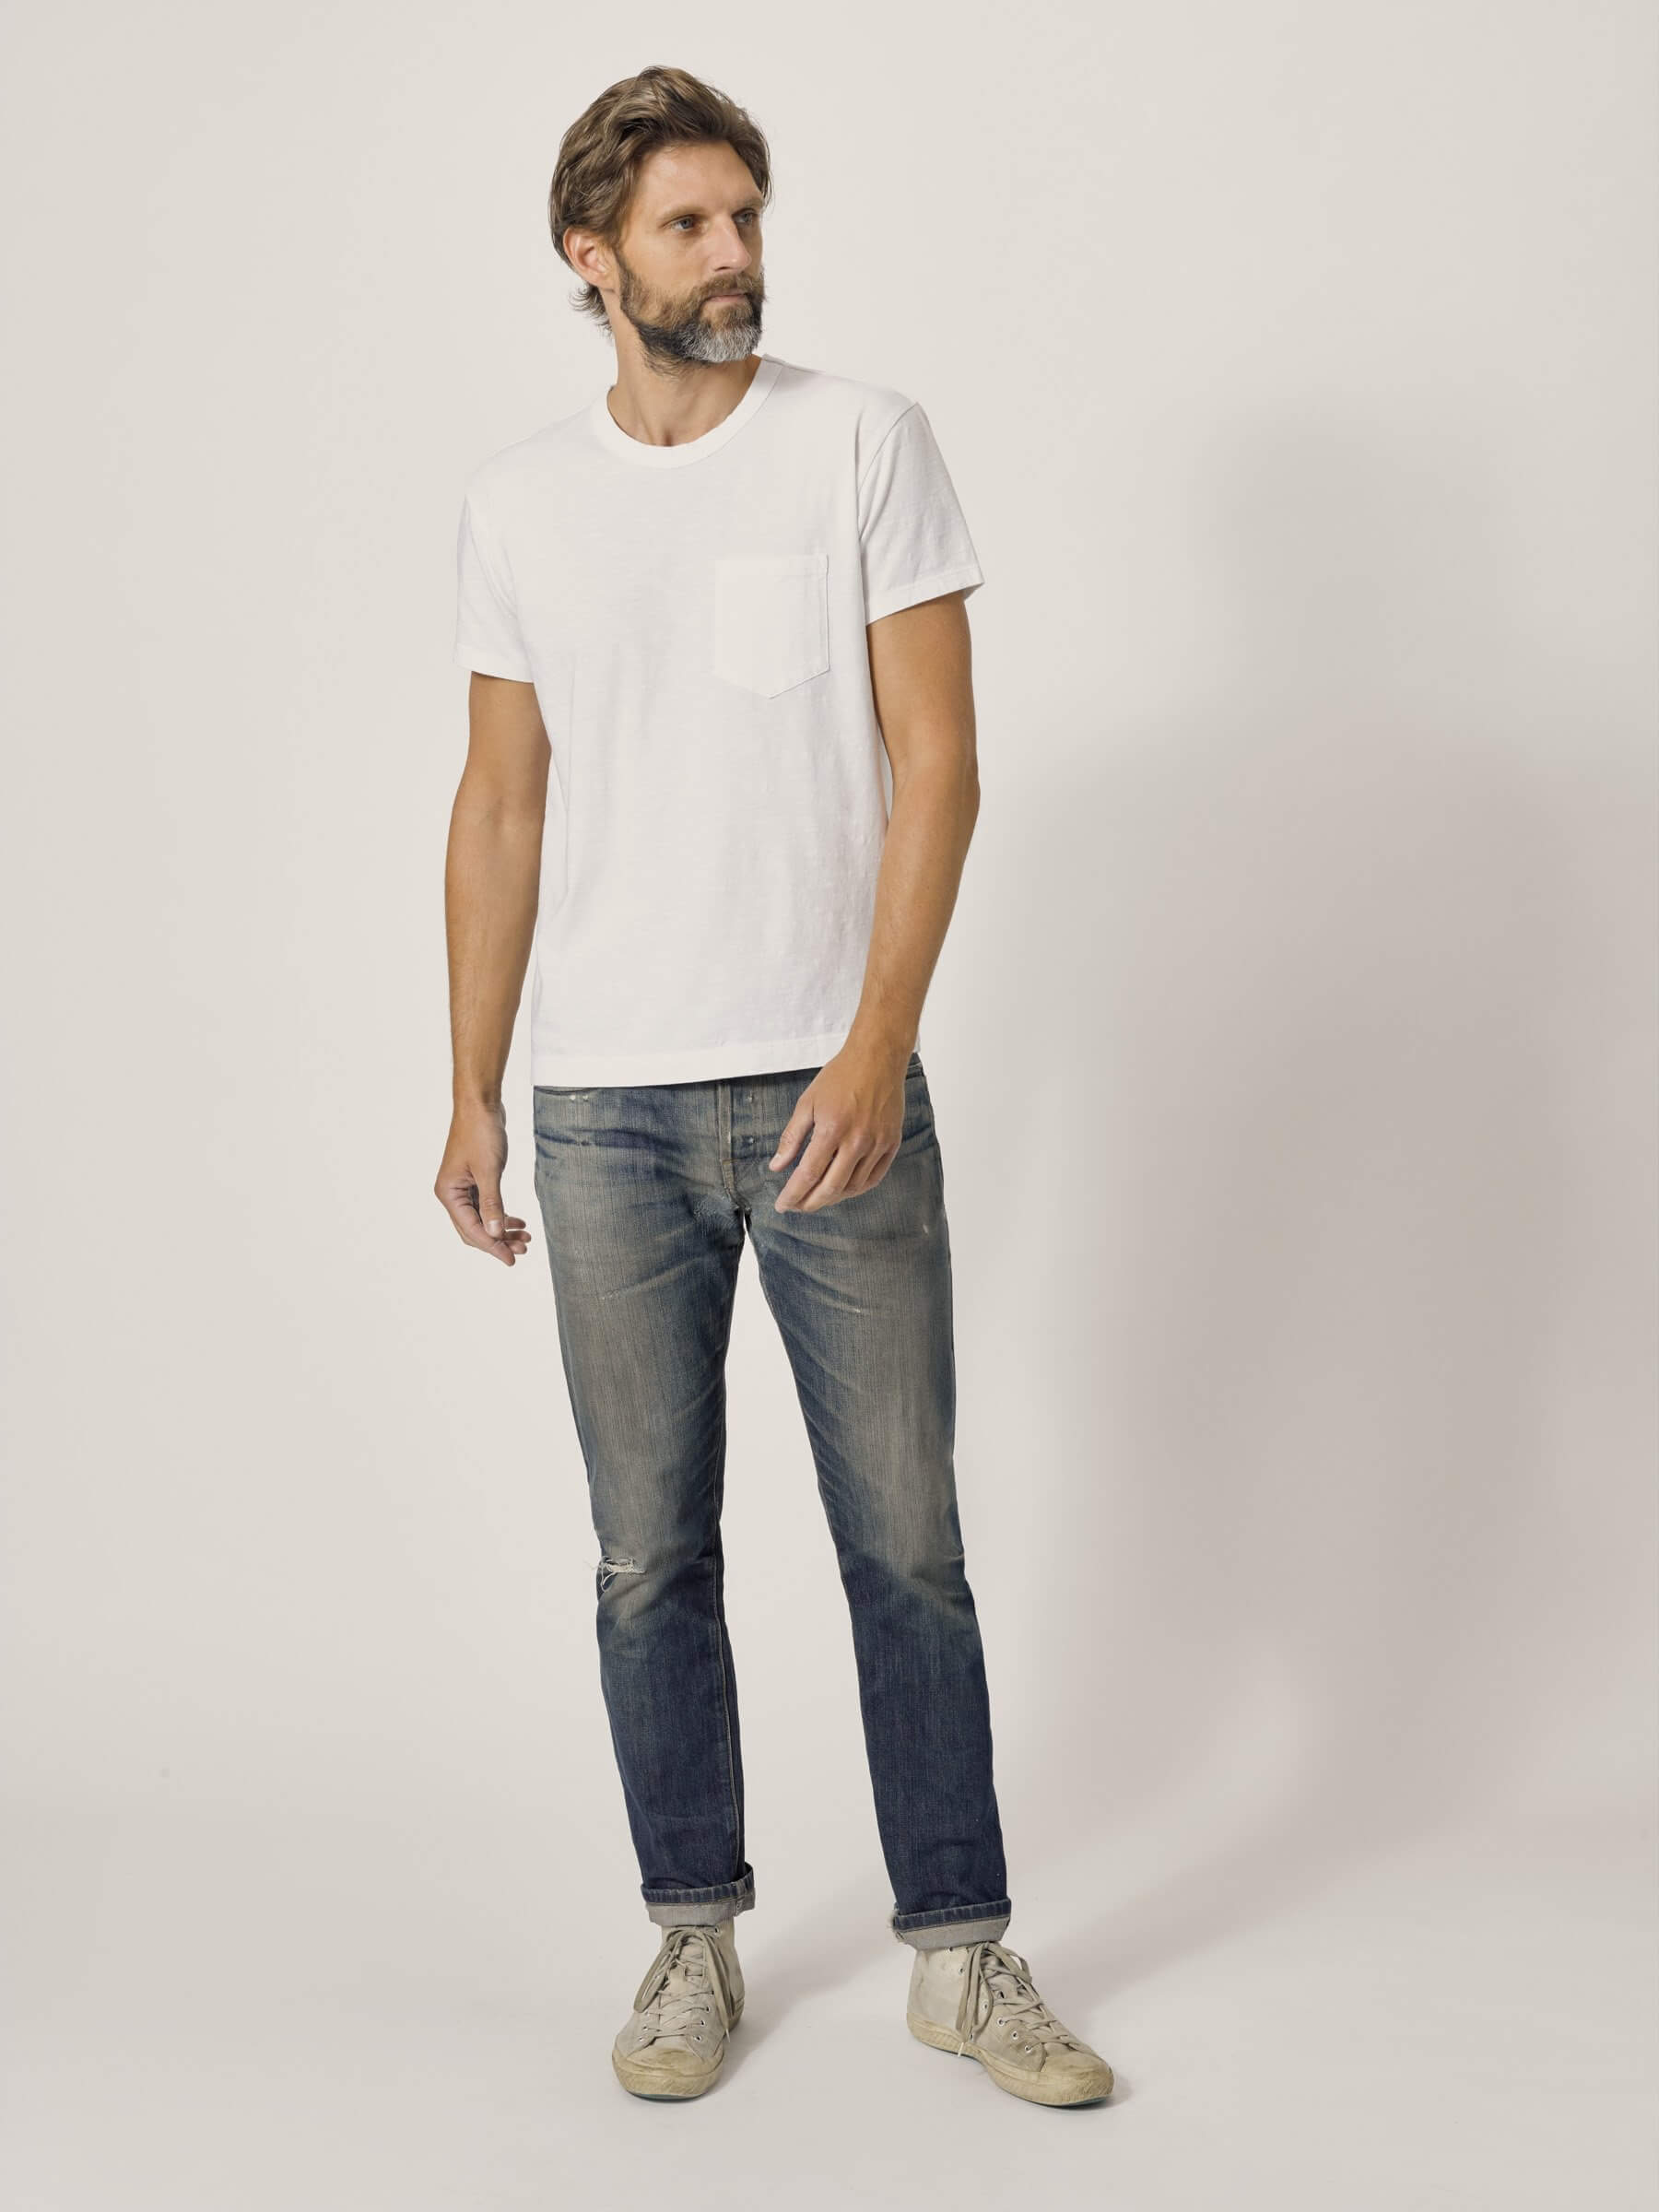 Men's classic jeans and white T-shirt